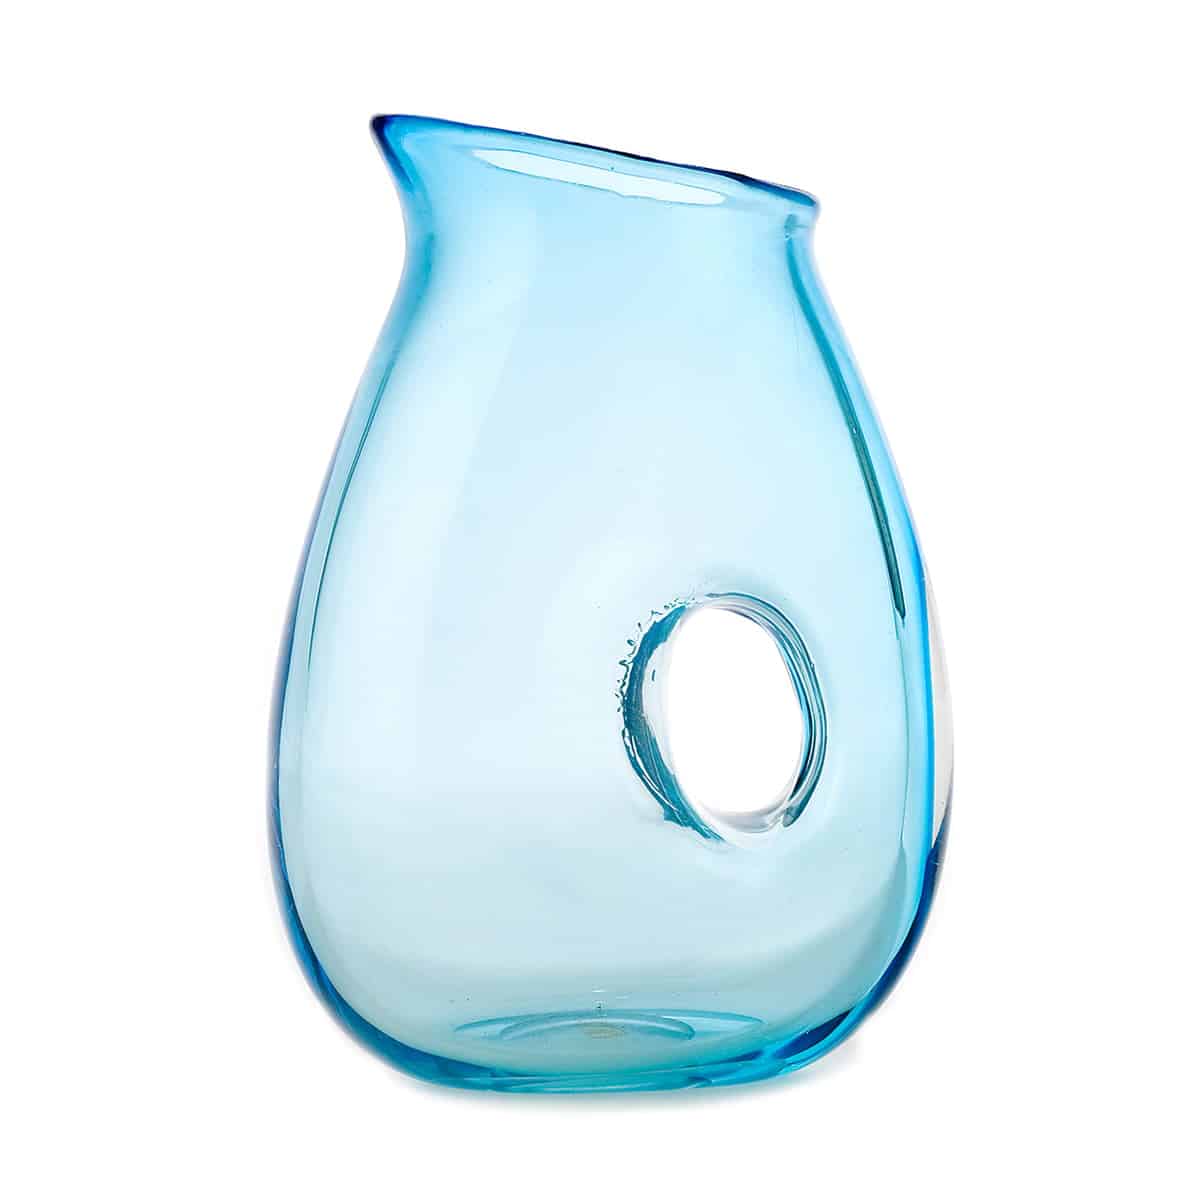 Pols Potten - Jug with hole